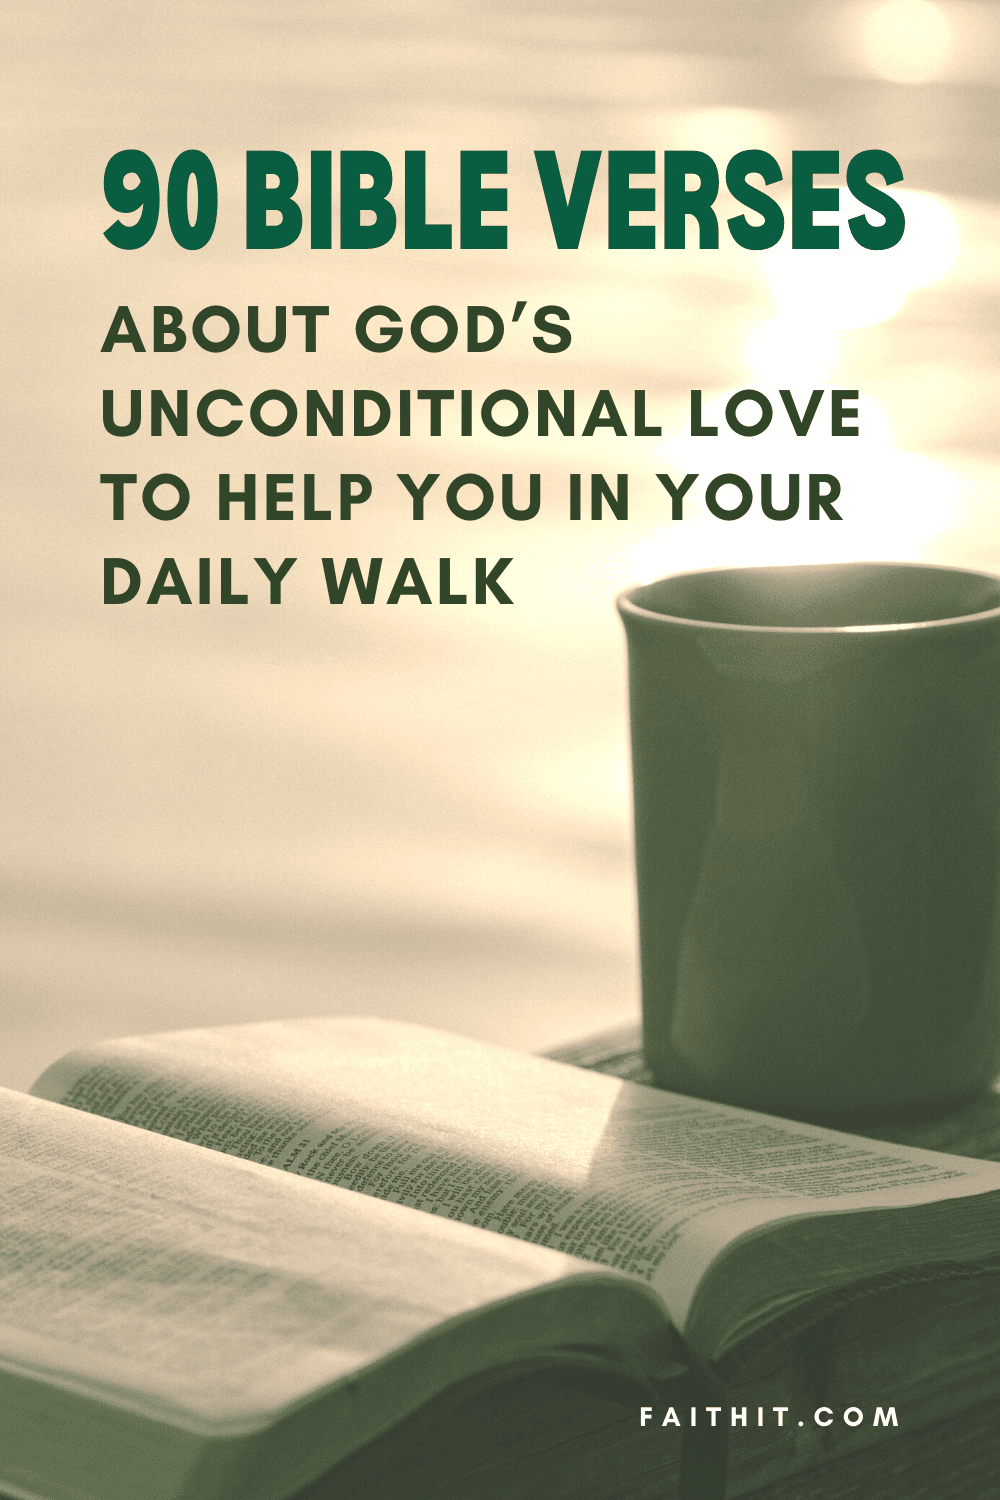 Bible verses about God's unconditional love